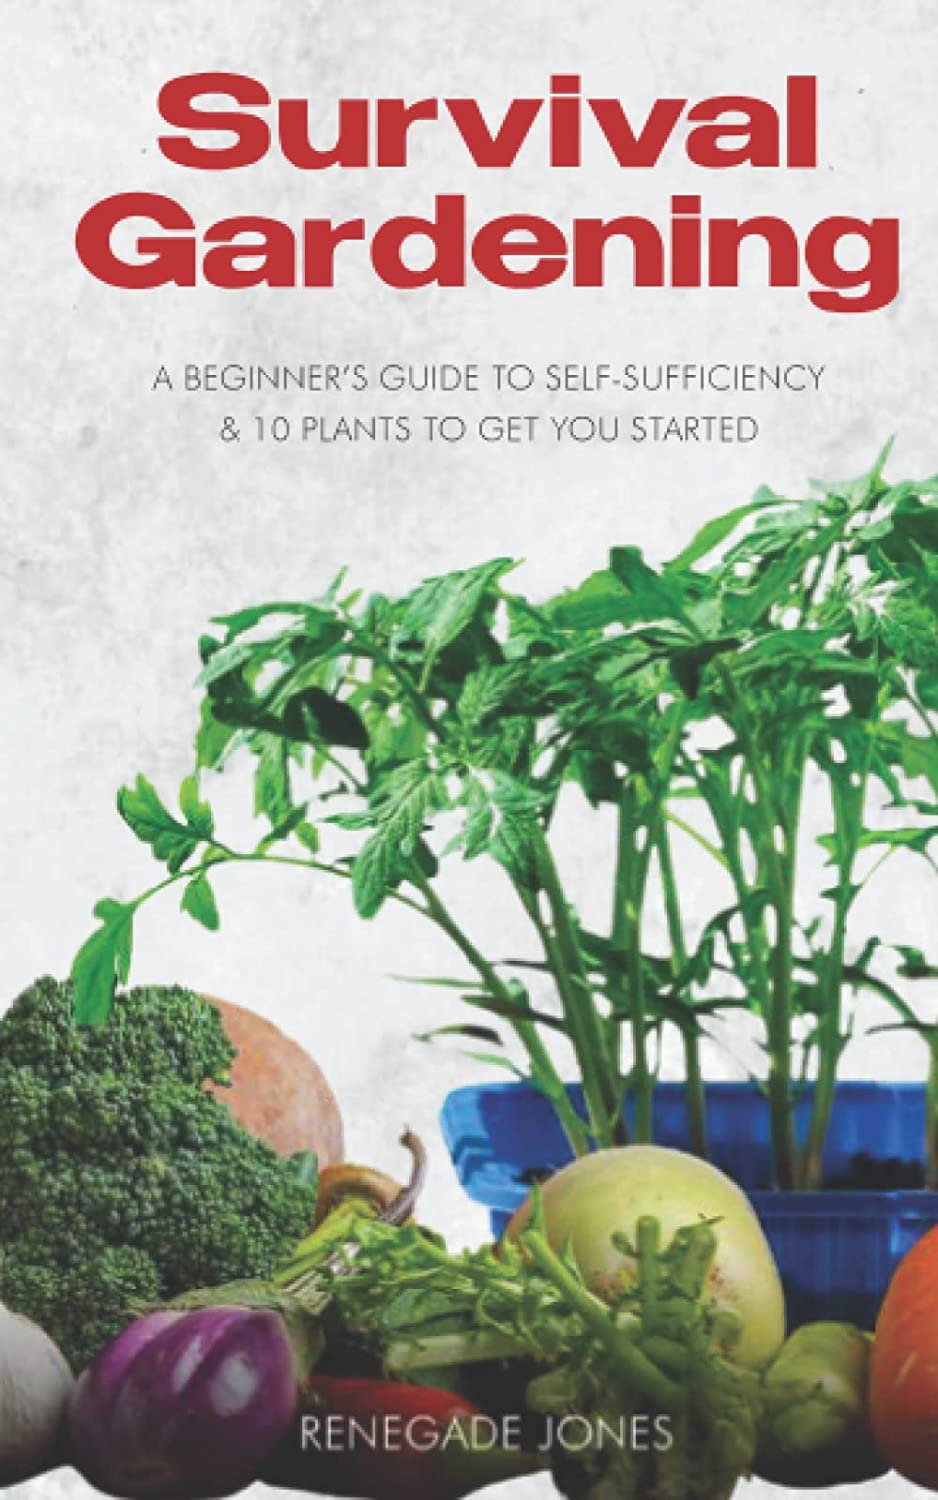 Survival Gardening: A Beginner’s Guide to Self-Sufficency & 10 Plants to Get You Started